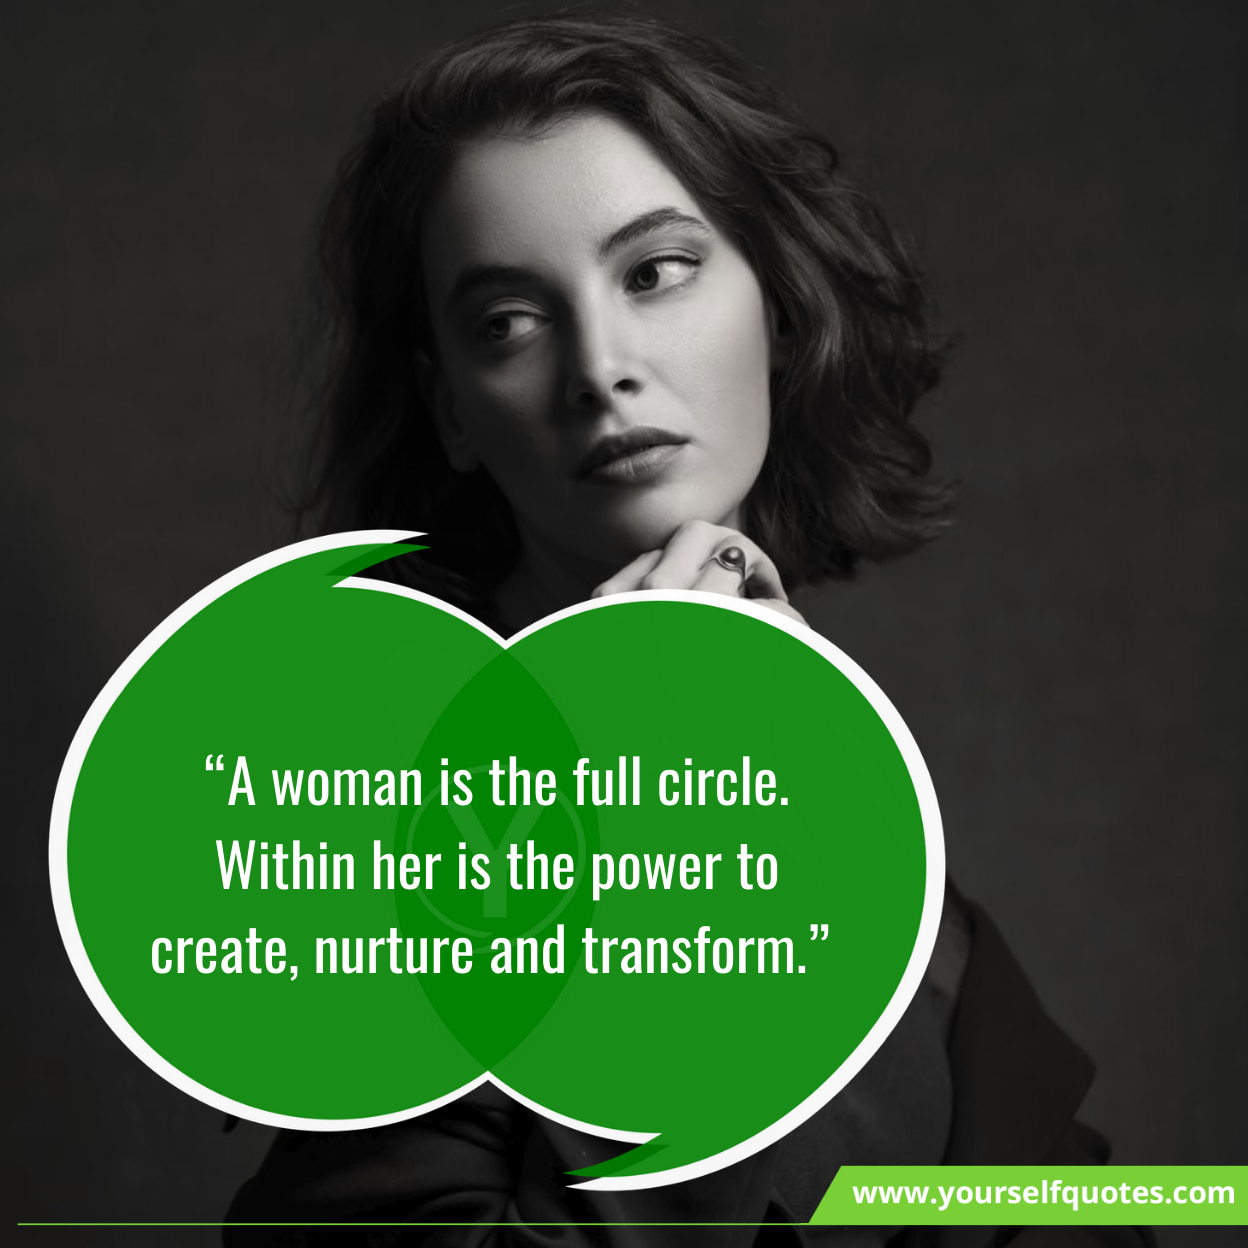 Inspirational Quotes for Women's Empowerment